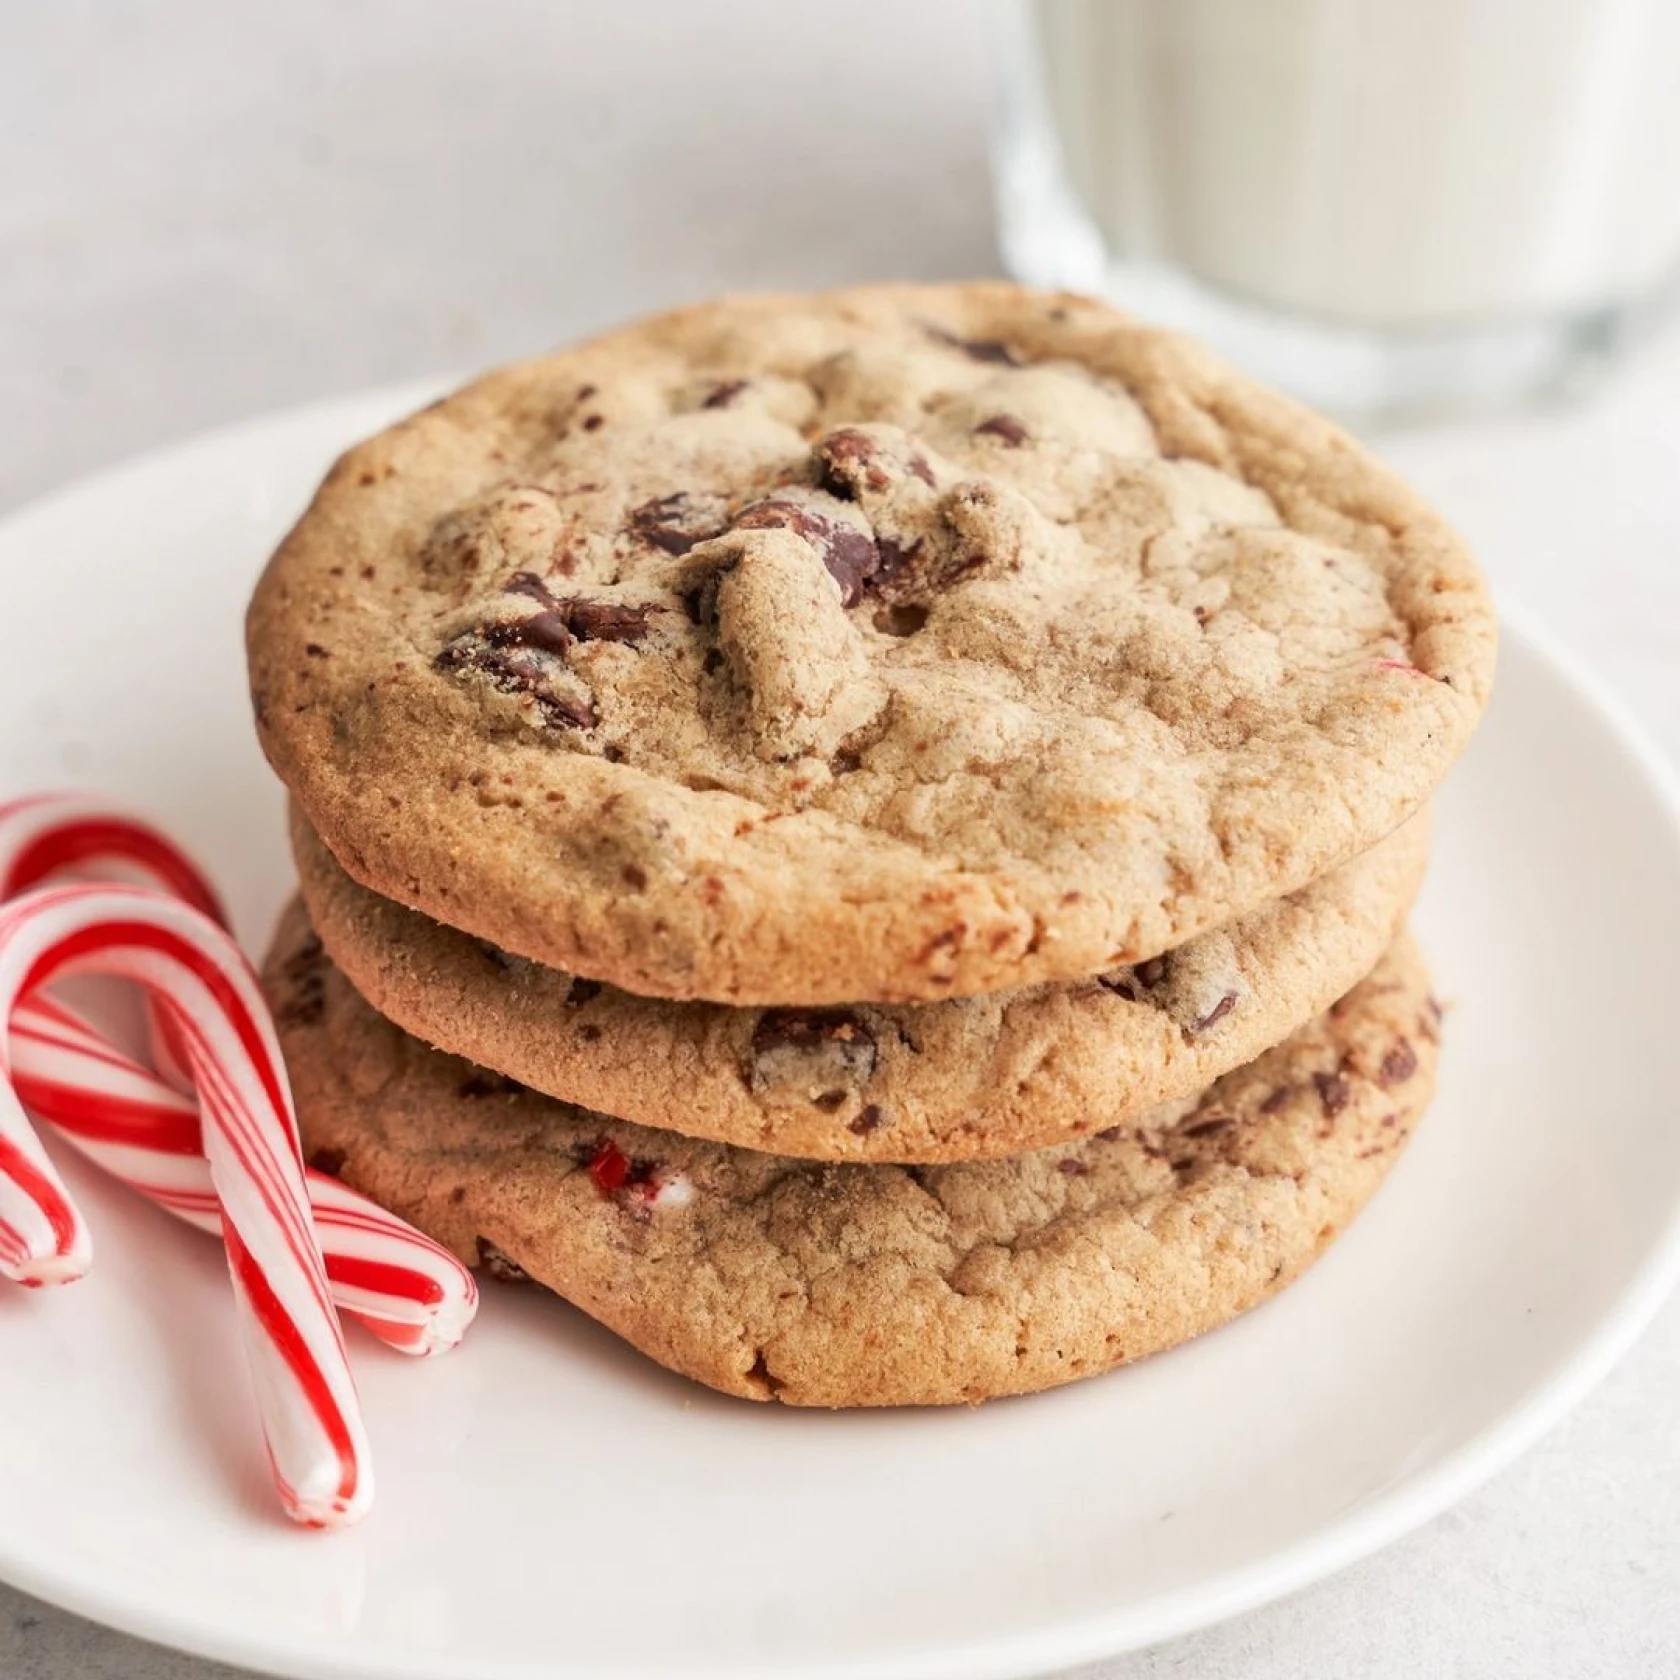 A stack of three chocolate chip cookies sit on a plate next to two candy canes